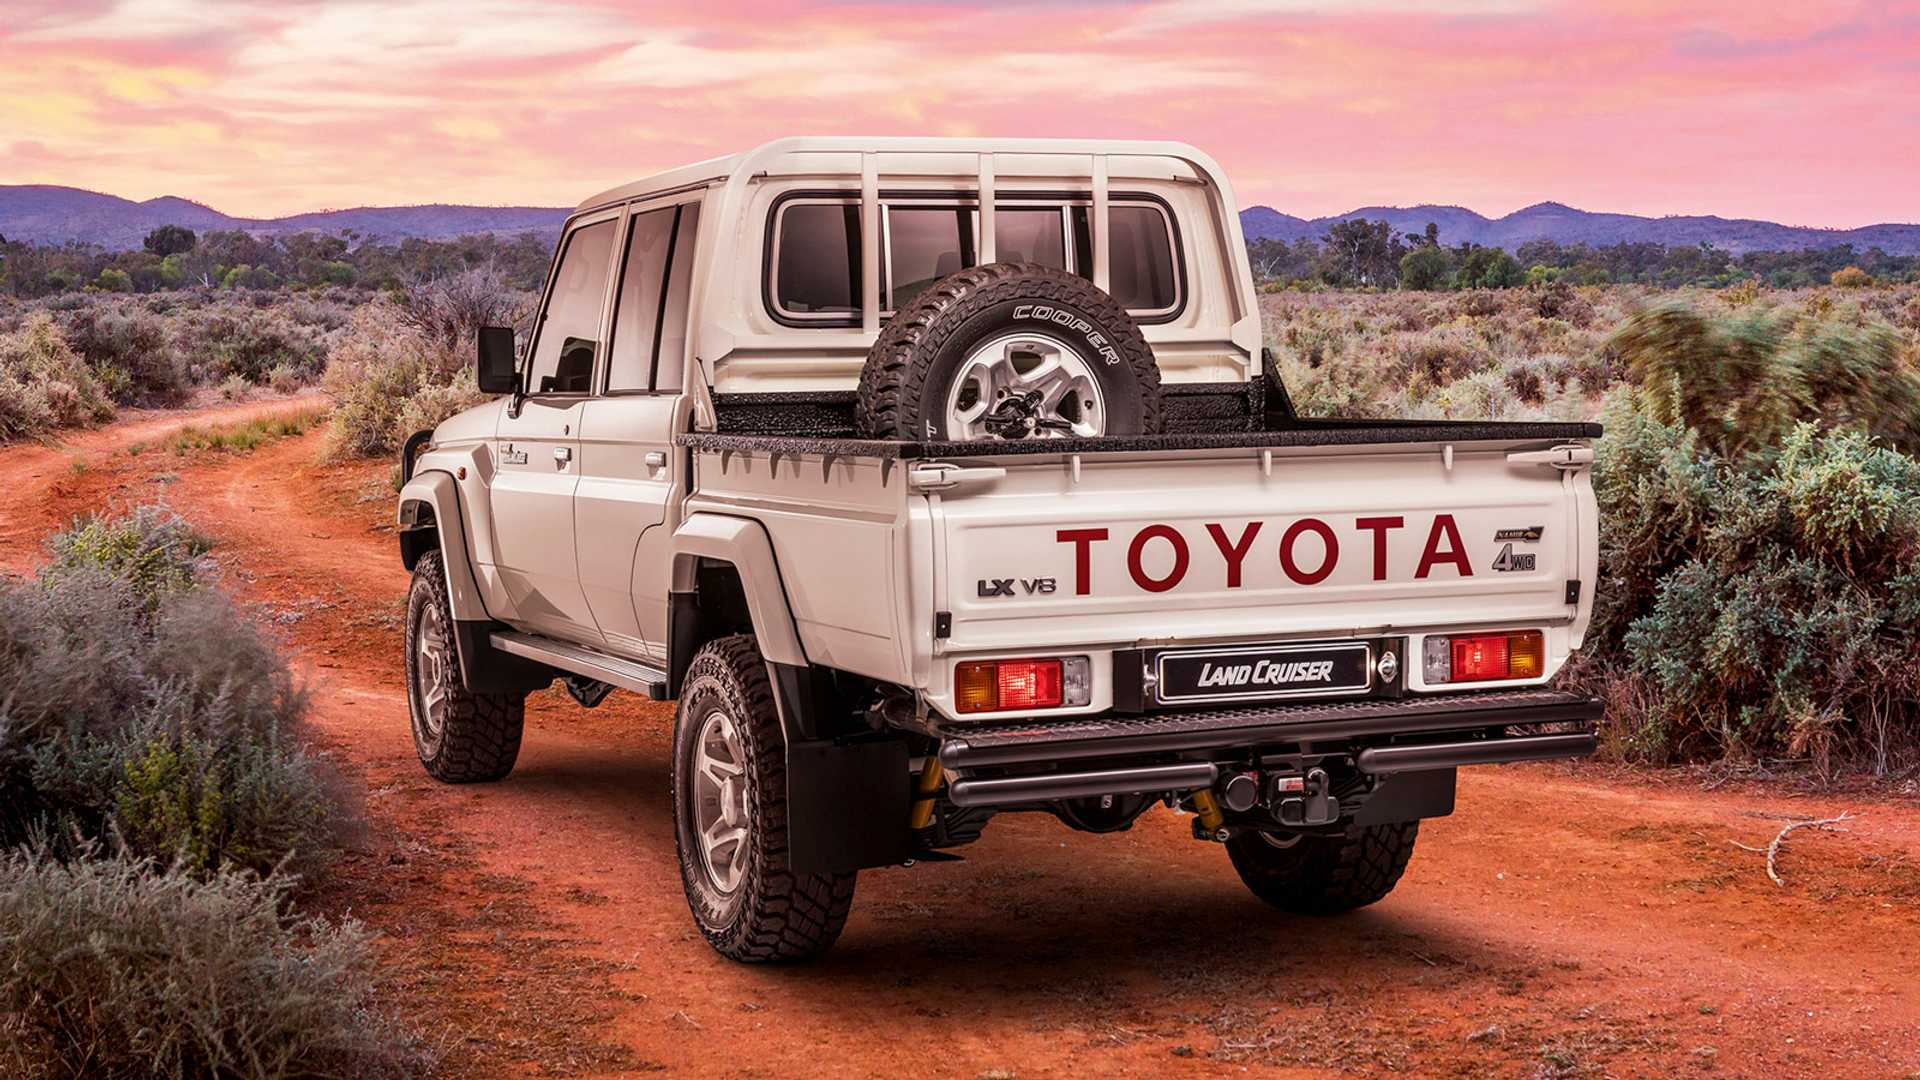 Toyota Land Cruiser Namib Might Be Coolest Car On Sale. In S. Africa